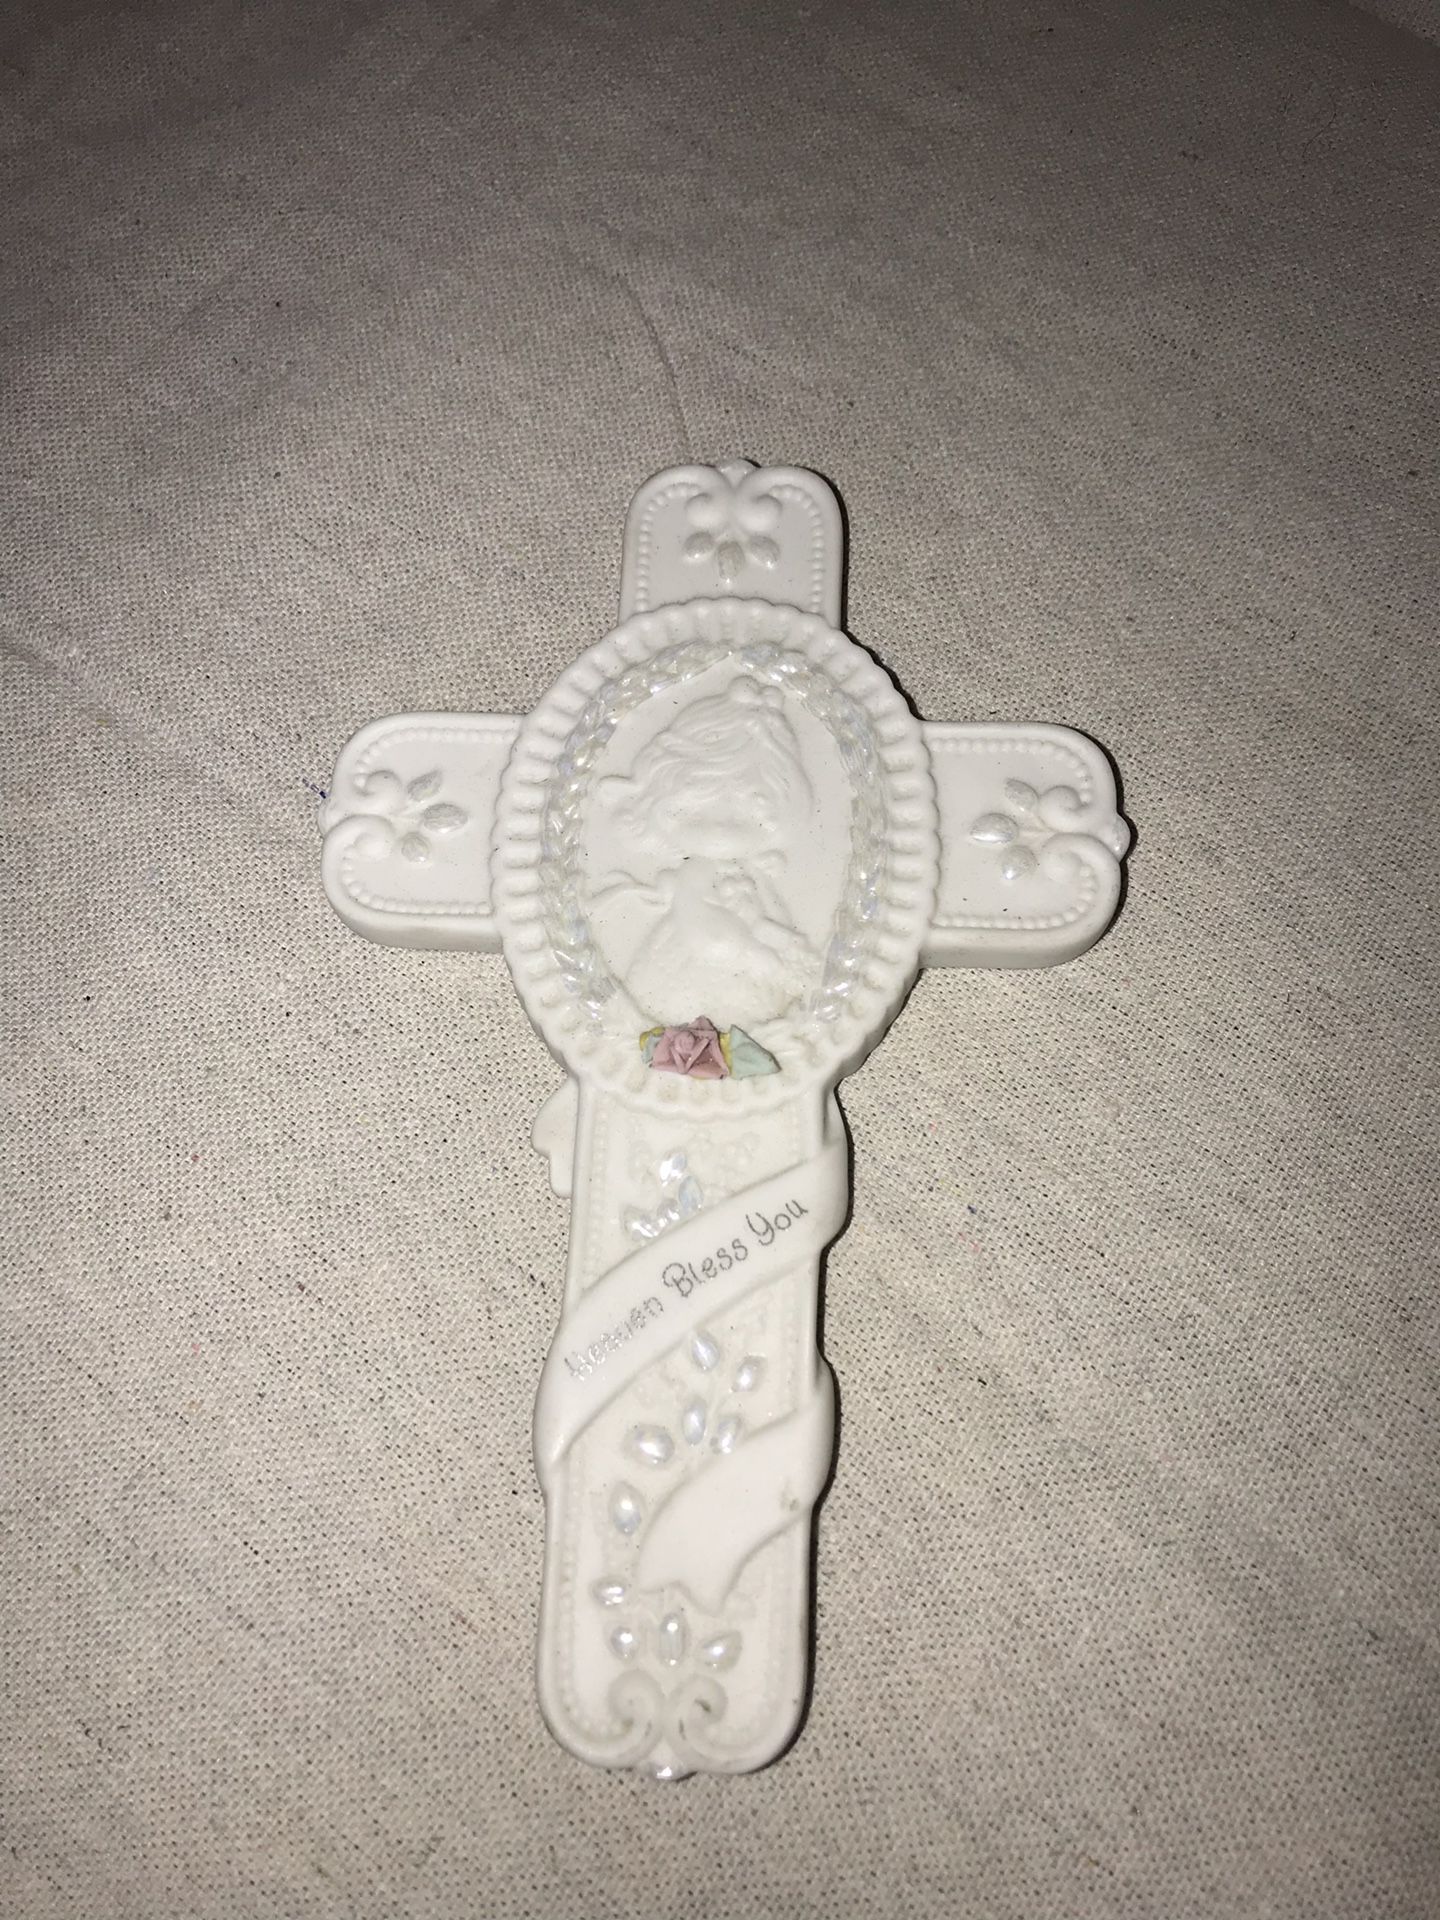 Precious Moments “My Baptism Day” cross